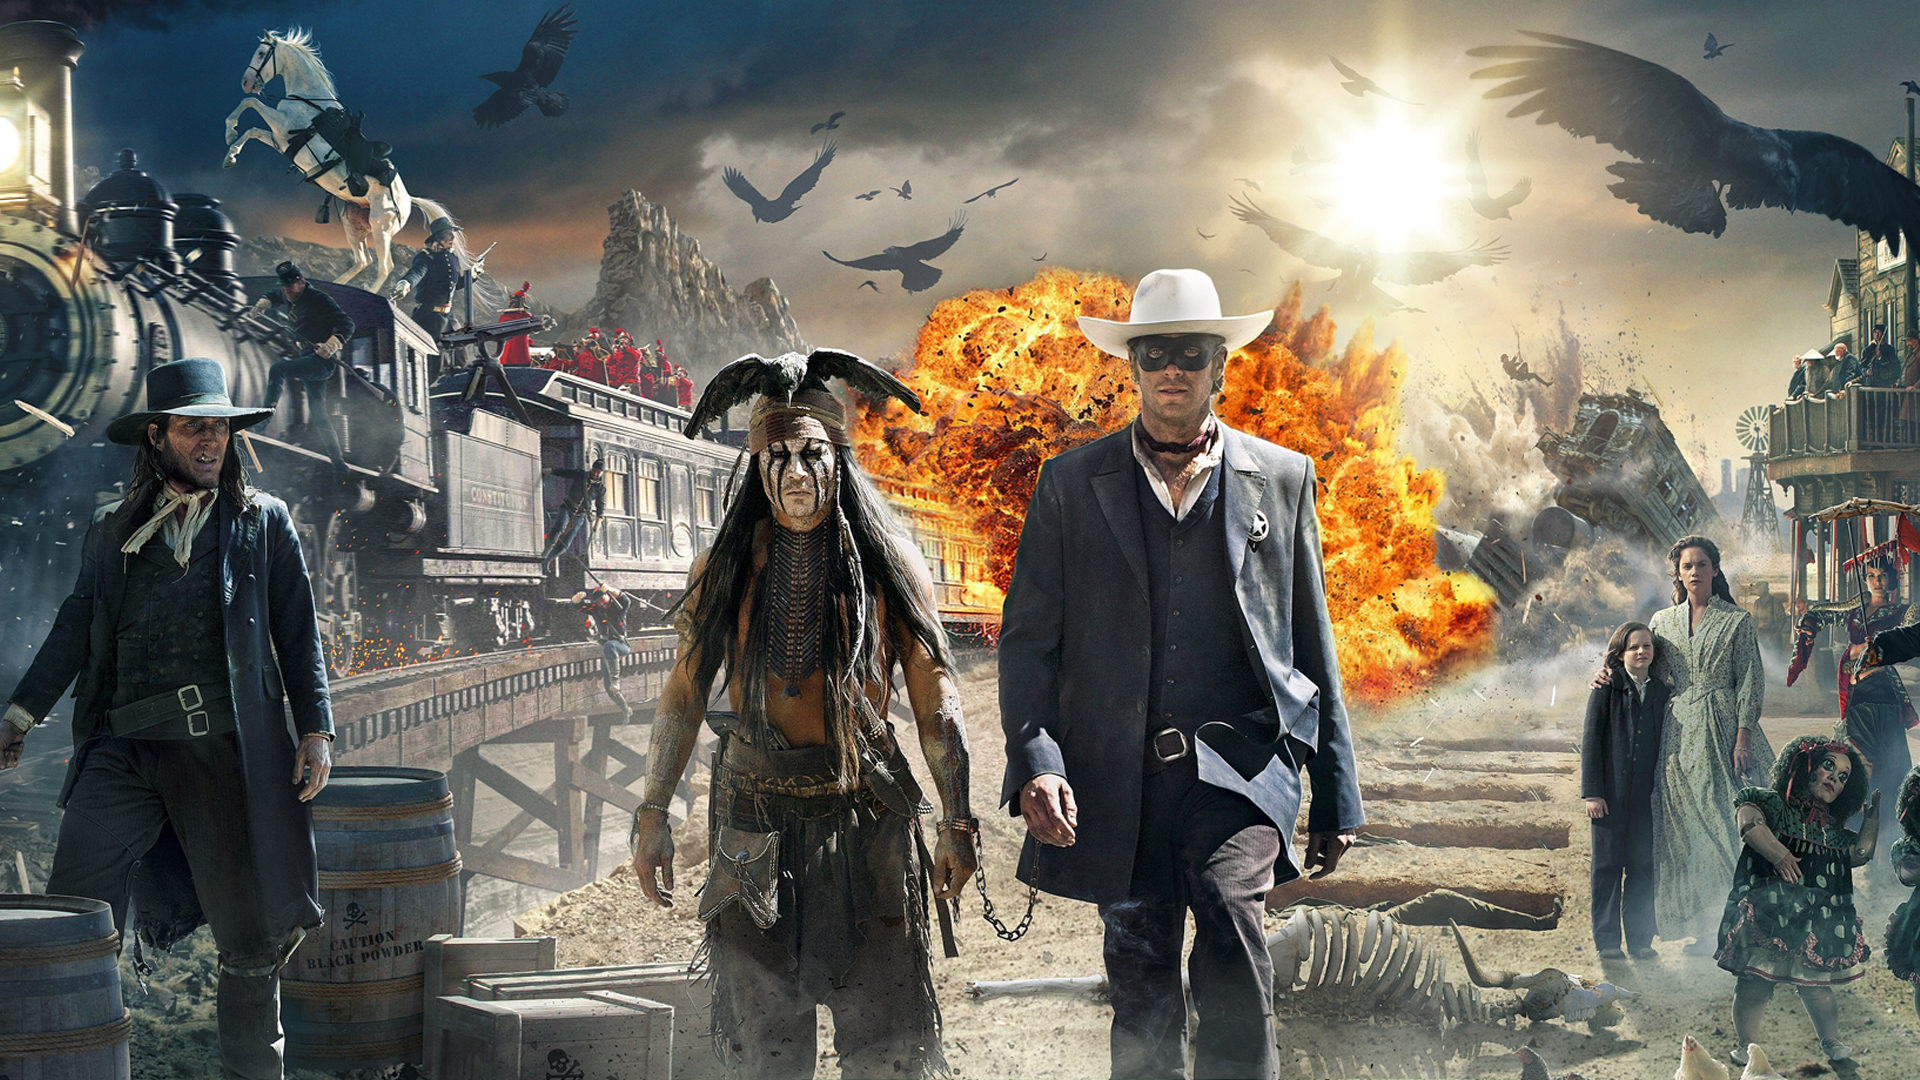 The Lone Ranger Wallpaper 1920x1080 by sachso74 on